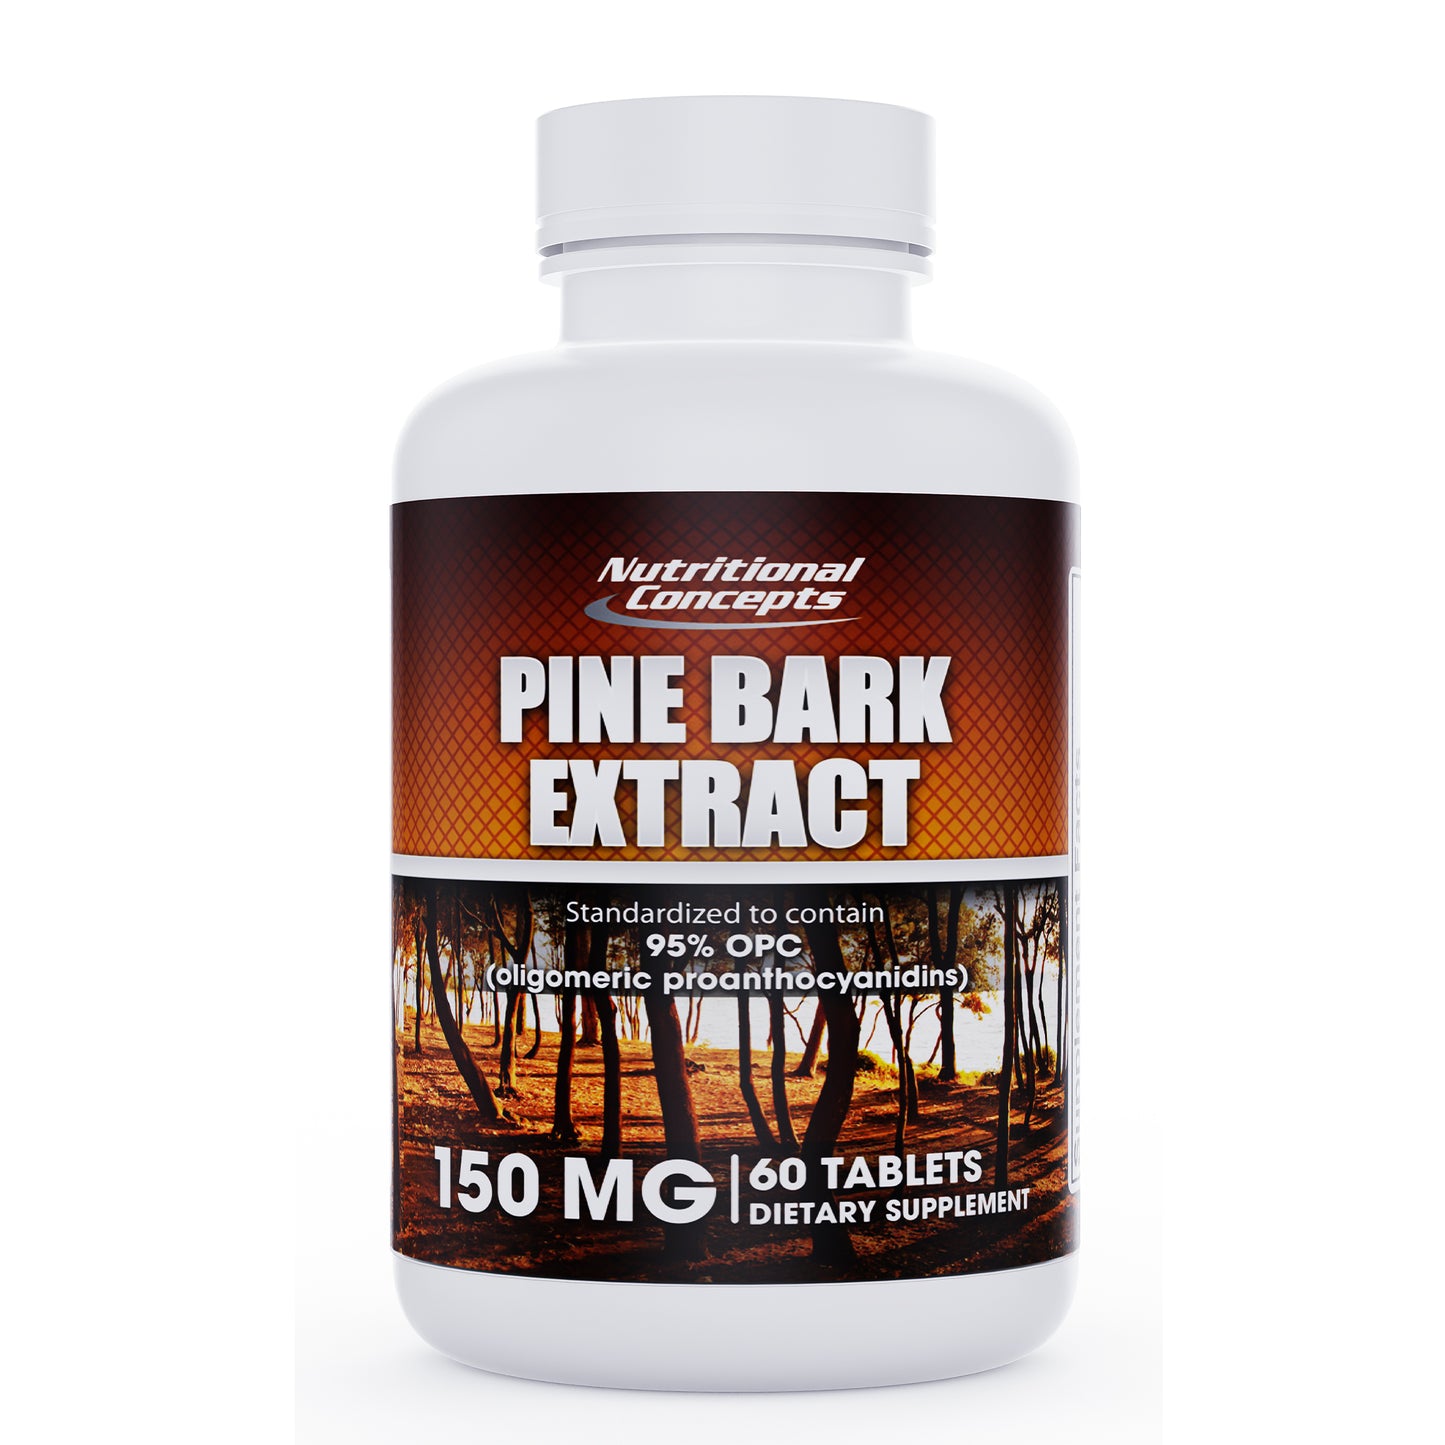 Nutritional Concepts  Pine Bark Extract Tablets 150 MG - 60 Tablets